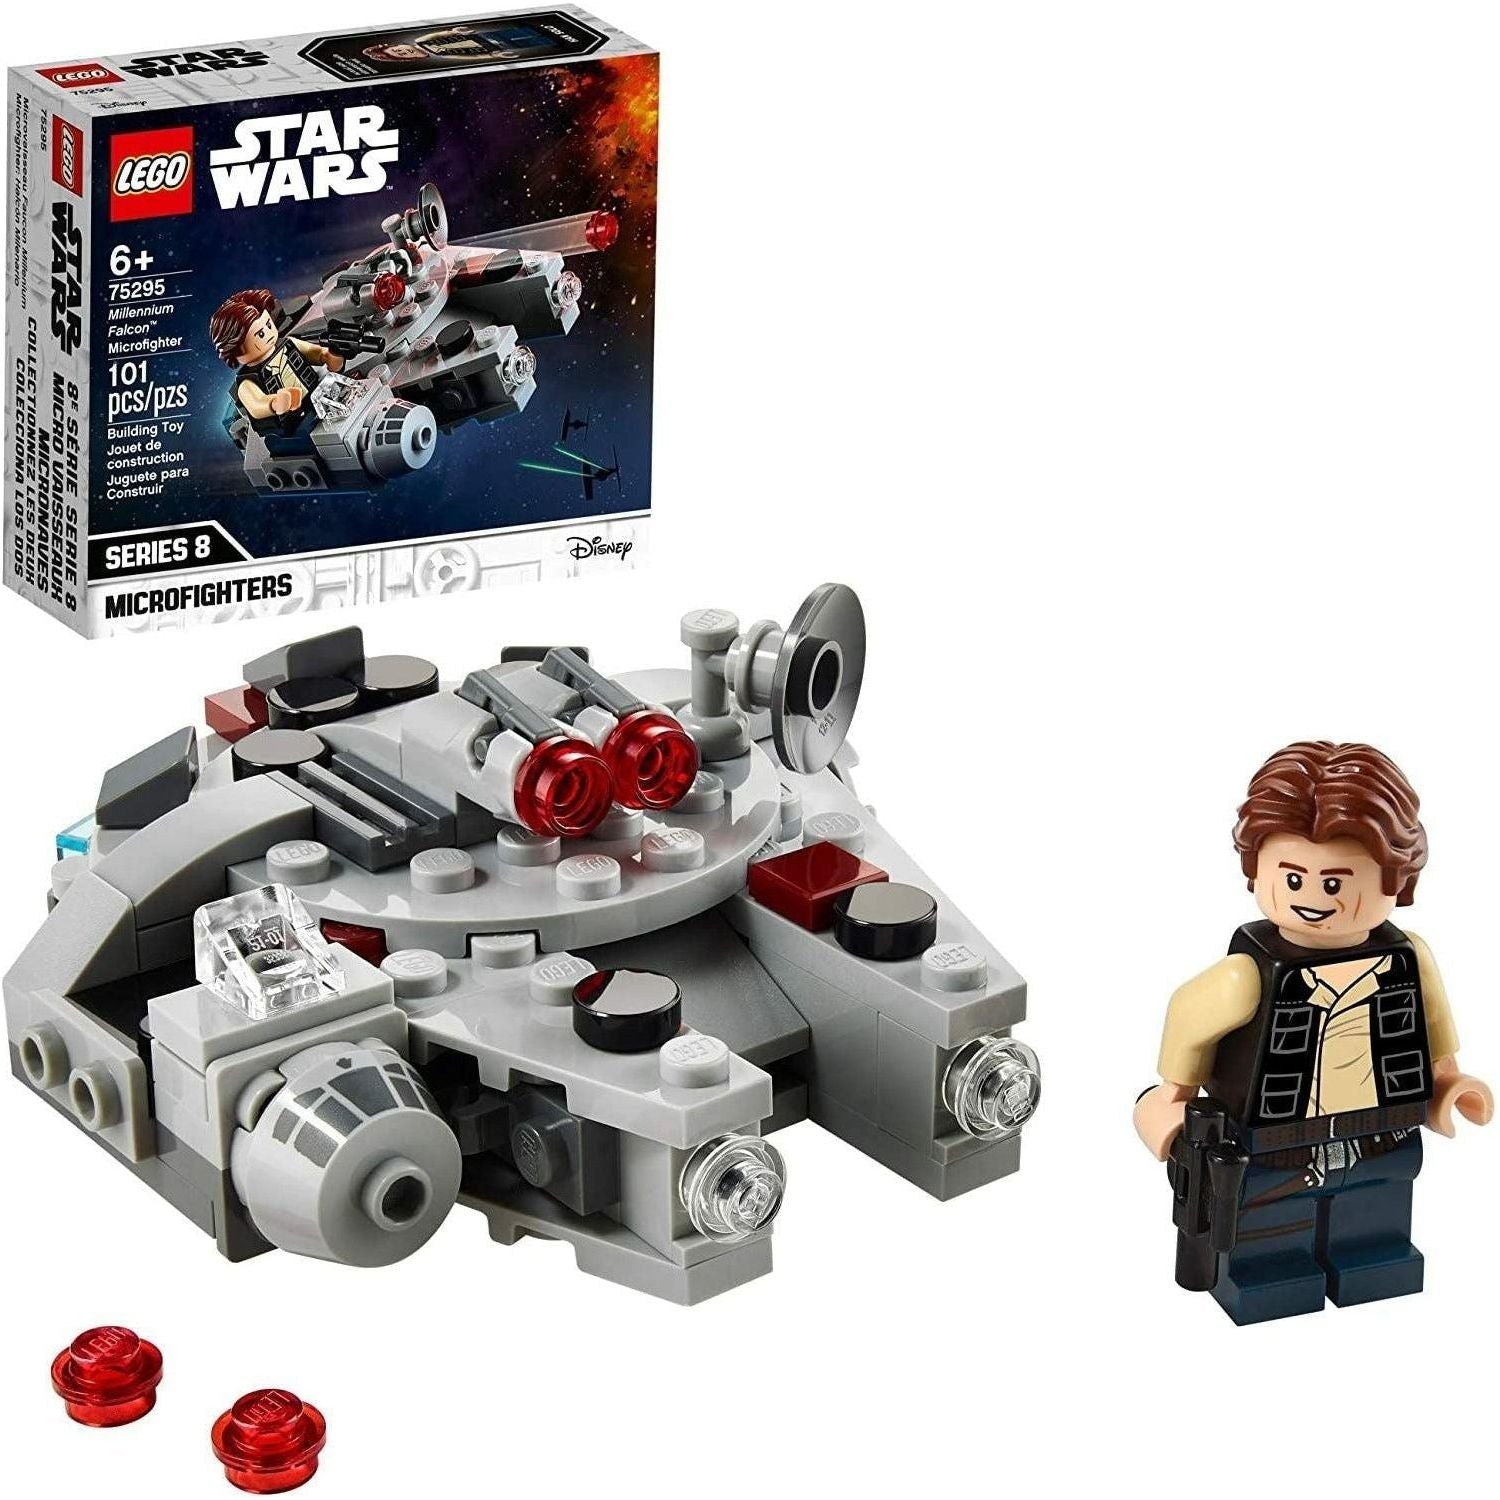 LEGO Star Wars Millennium Falcon Microfighter 75295 Building Kit (101 Pieces) - BumbleToys - 6+ Years, Boys, LEGO, OXE, Pre-Order, star wars